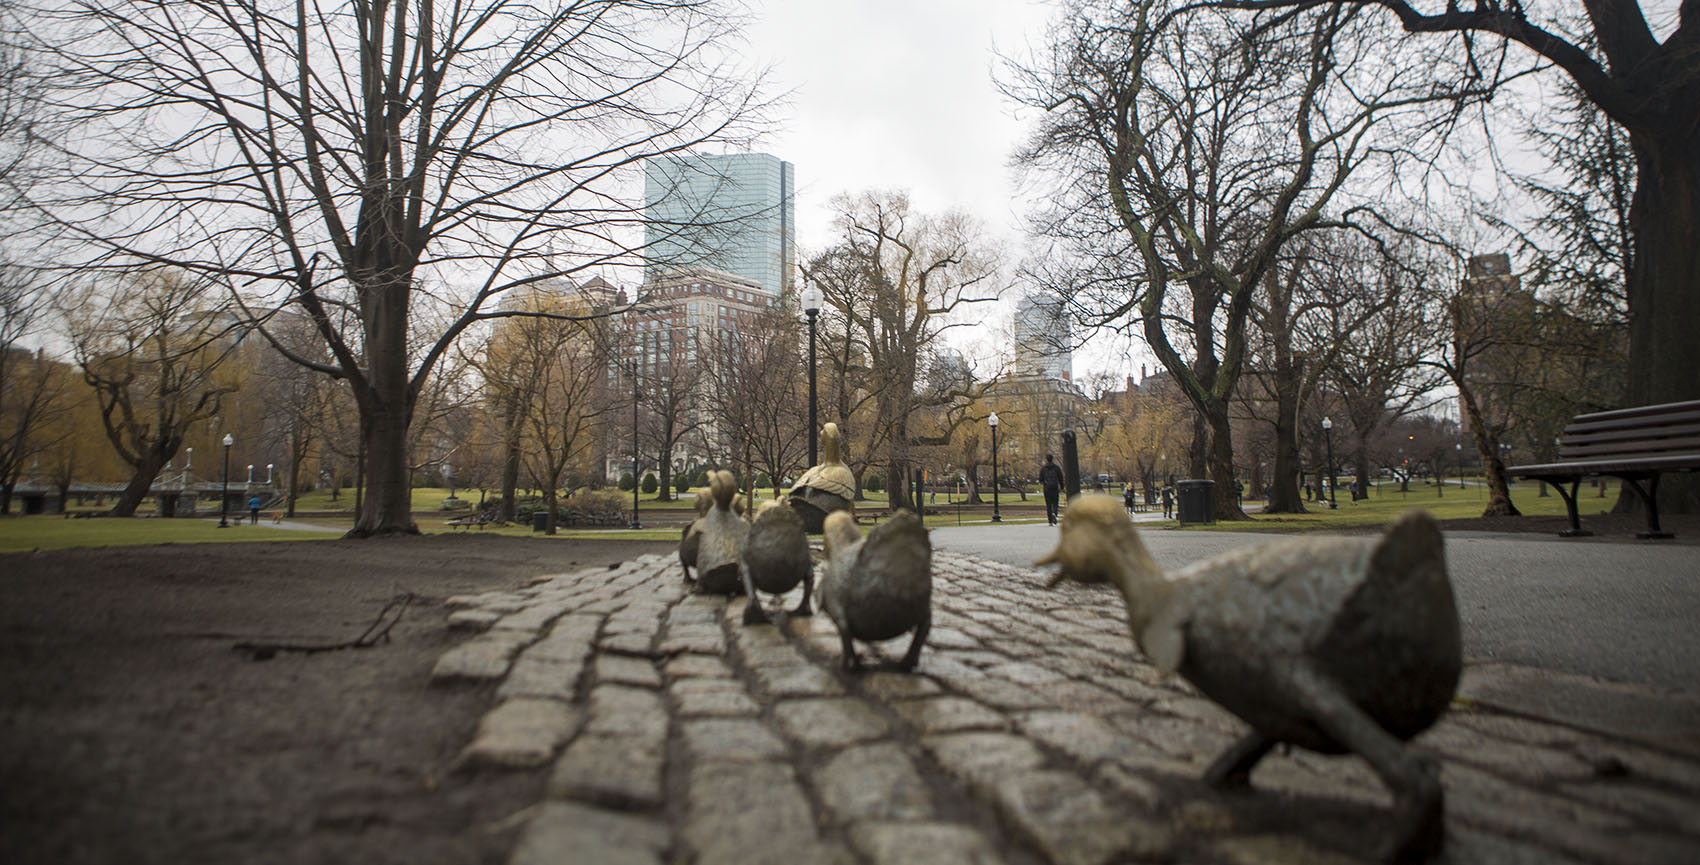 Boston's &quot;Make Way For Ducklings&quot; sculpture was installed in 1987. Moscow residents received their own version in 1991. (Jesse Costa/WBUR)